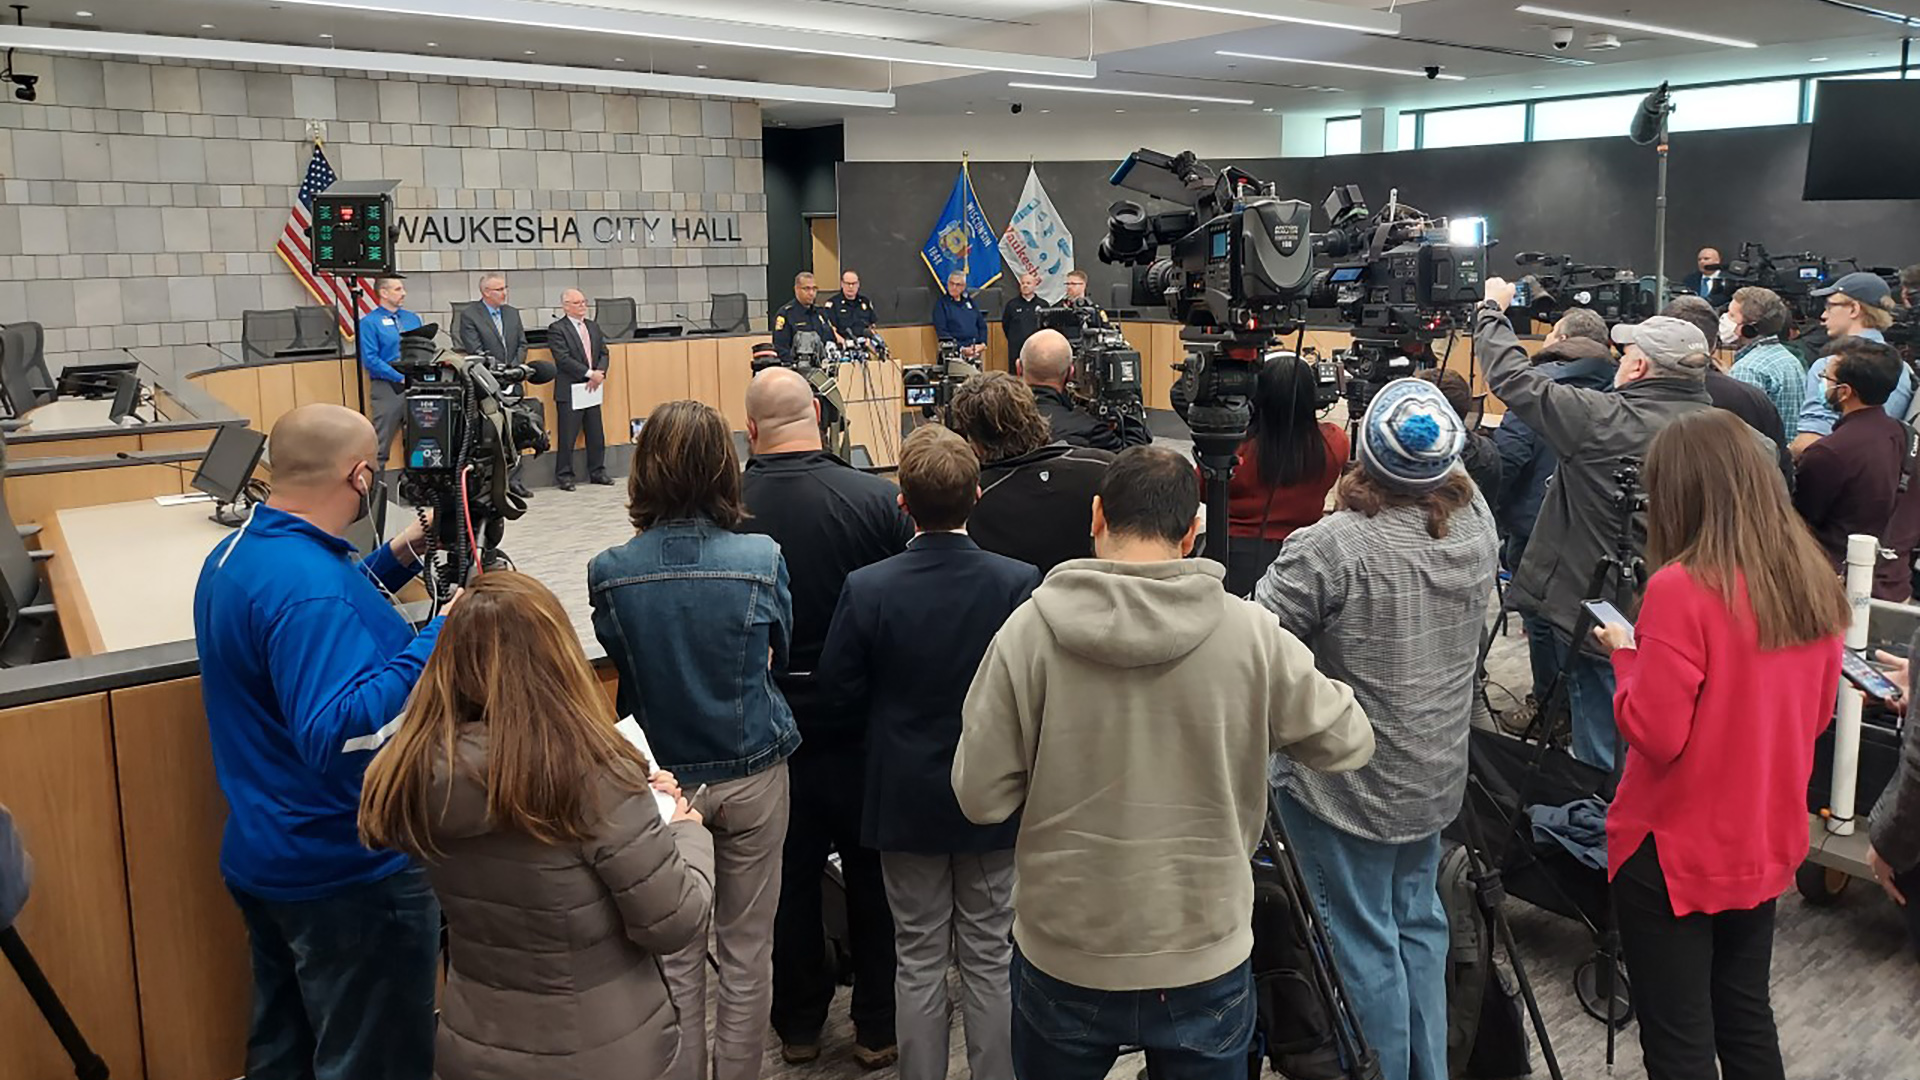 Reporters and TV cameras stand in a semicircle in a public meeting room facing local officials and law enforcement officers giving a press conference.